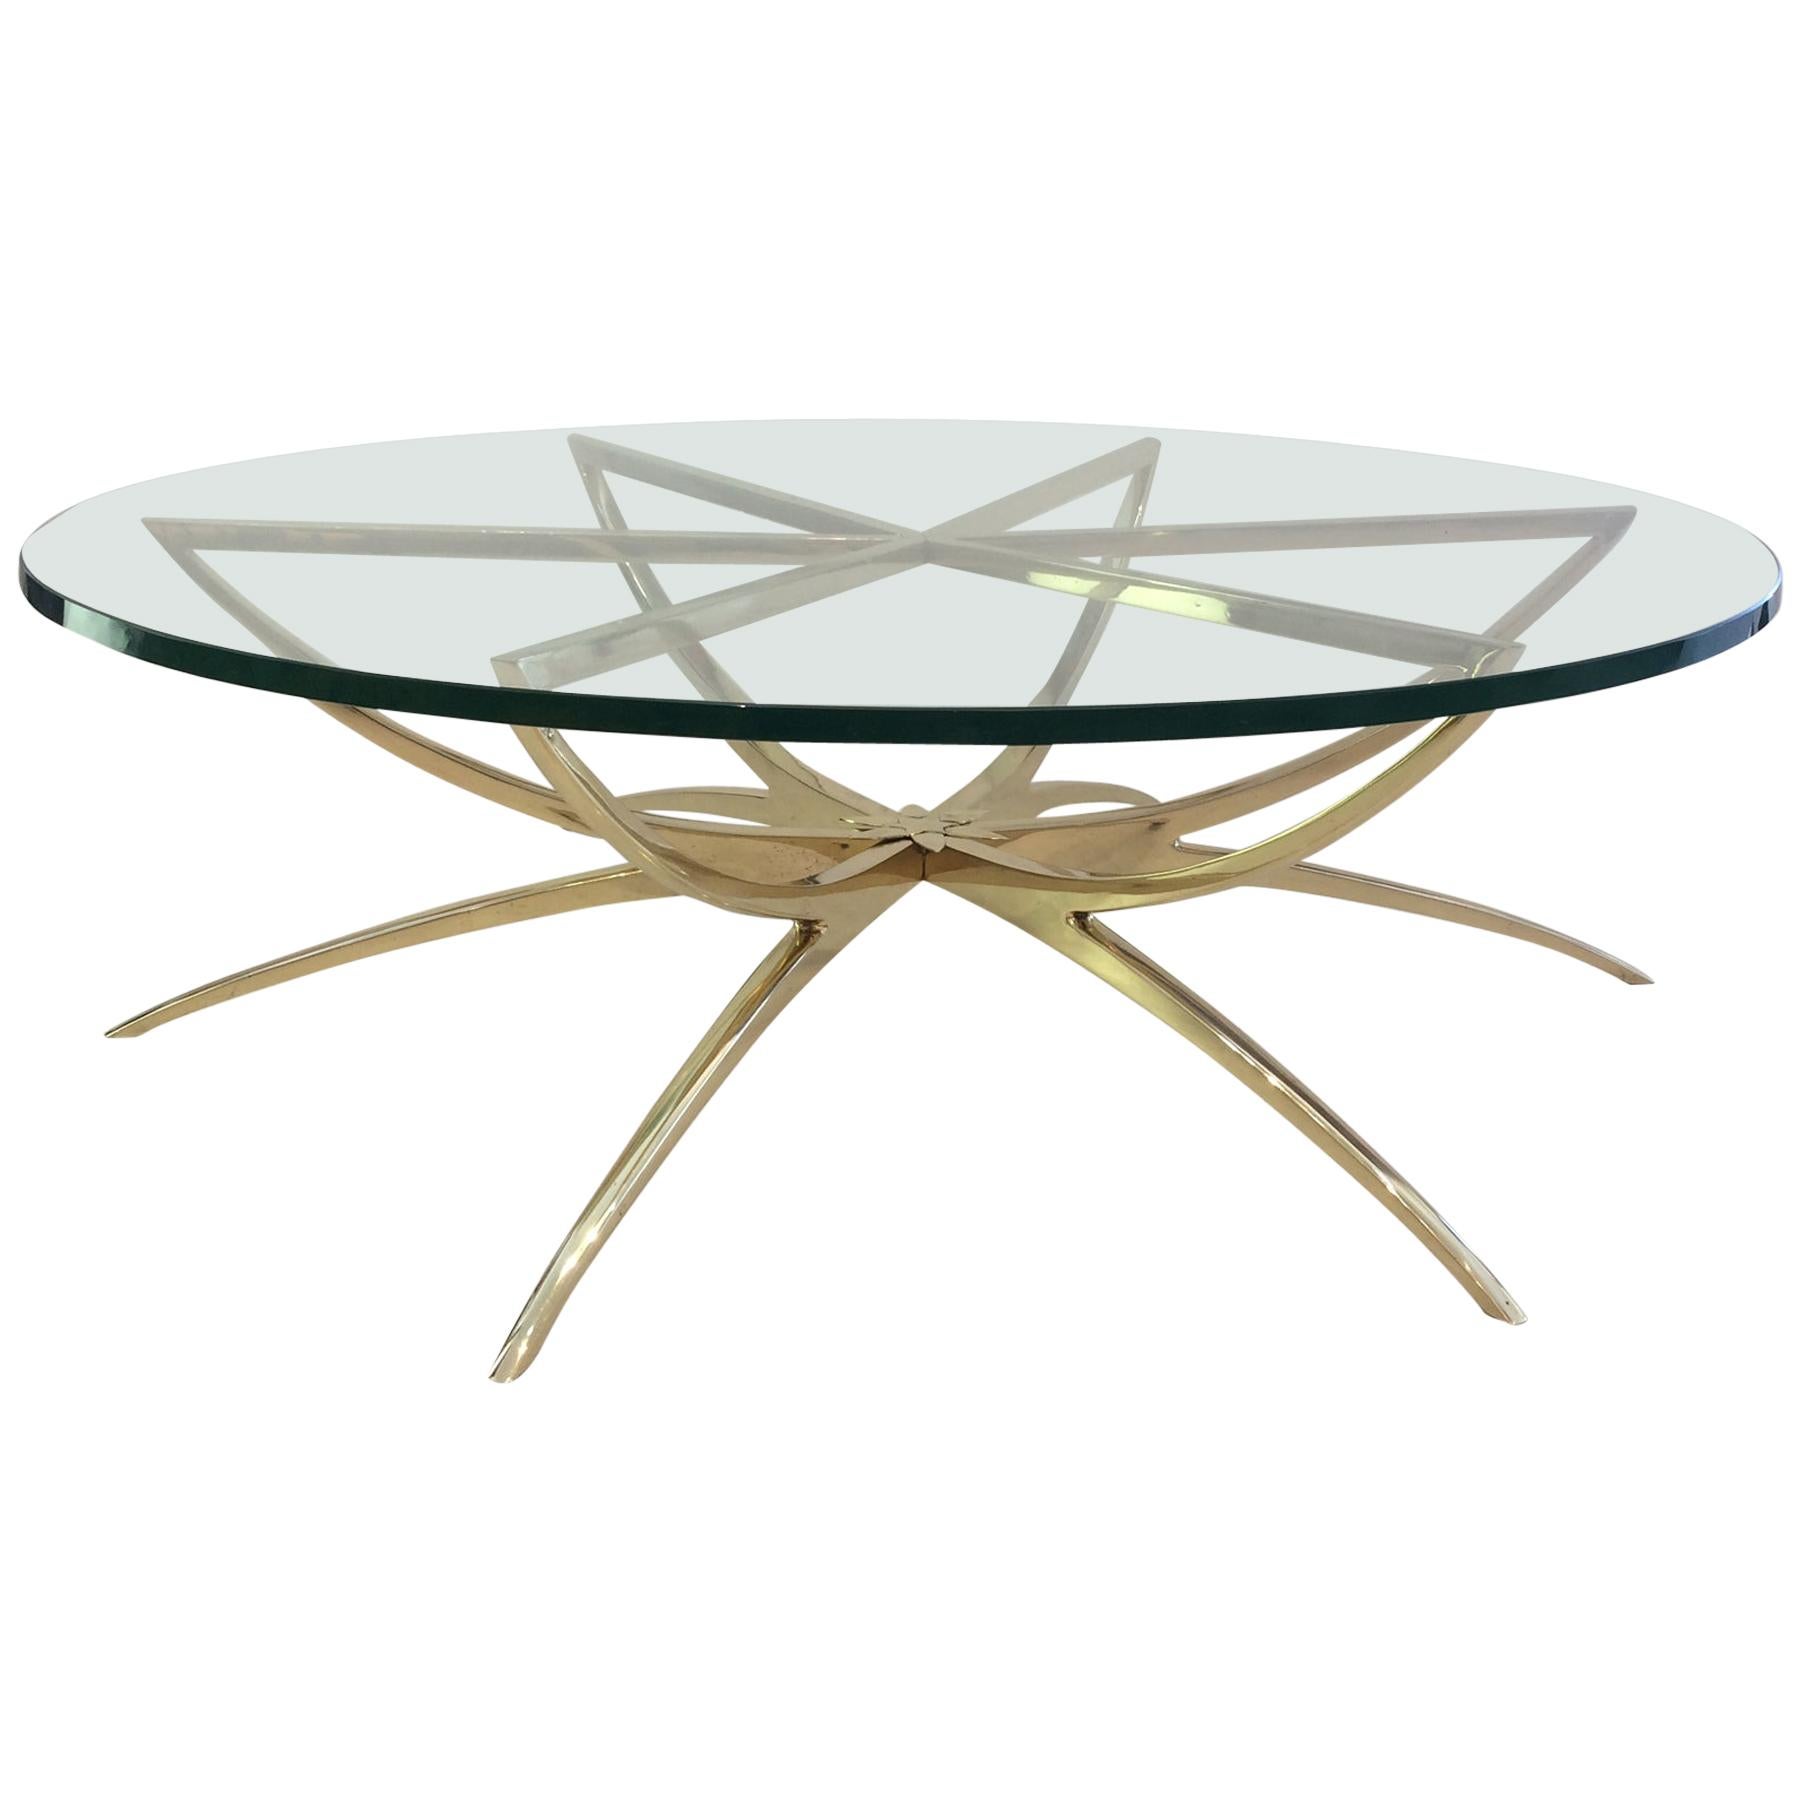 1970s Italian Brass Spider Based Cocktail Table